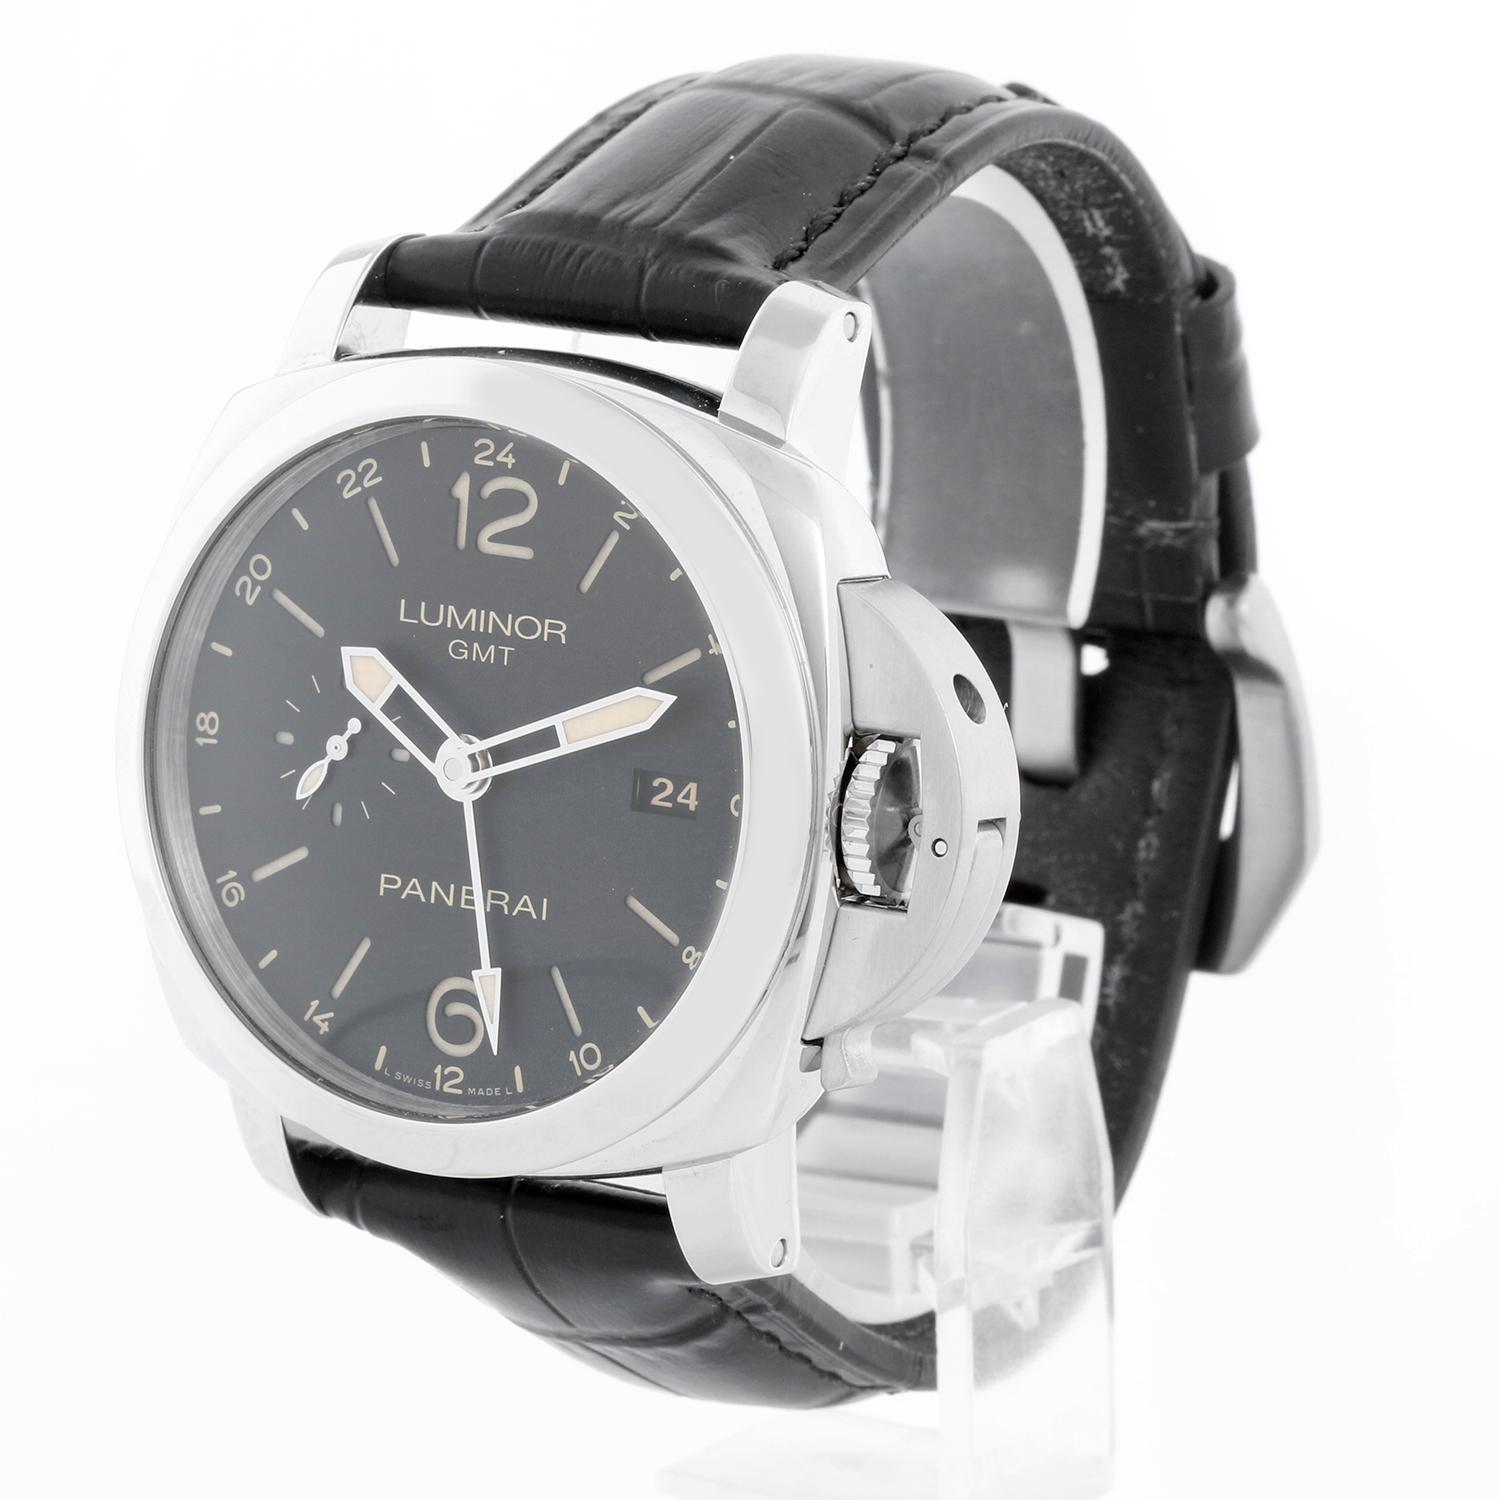 Panerai Luminor GMT 44mm Steel Mens Watch PAM00531 - Automatic. Stainless steel case ( 44 mm ). Black dial with luminous hands and index hour markers. Arabic numerals at 6 and 12. Small seconds sub-dial located at the 9 o'clock position, with